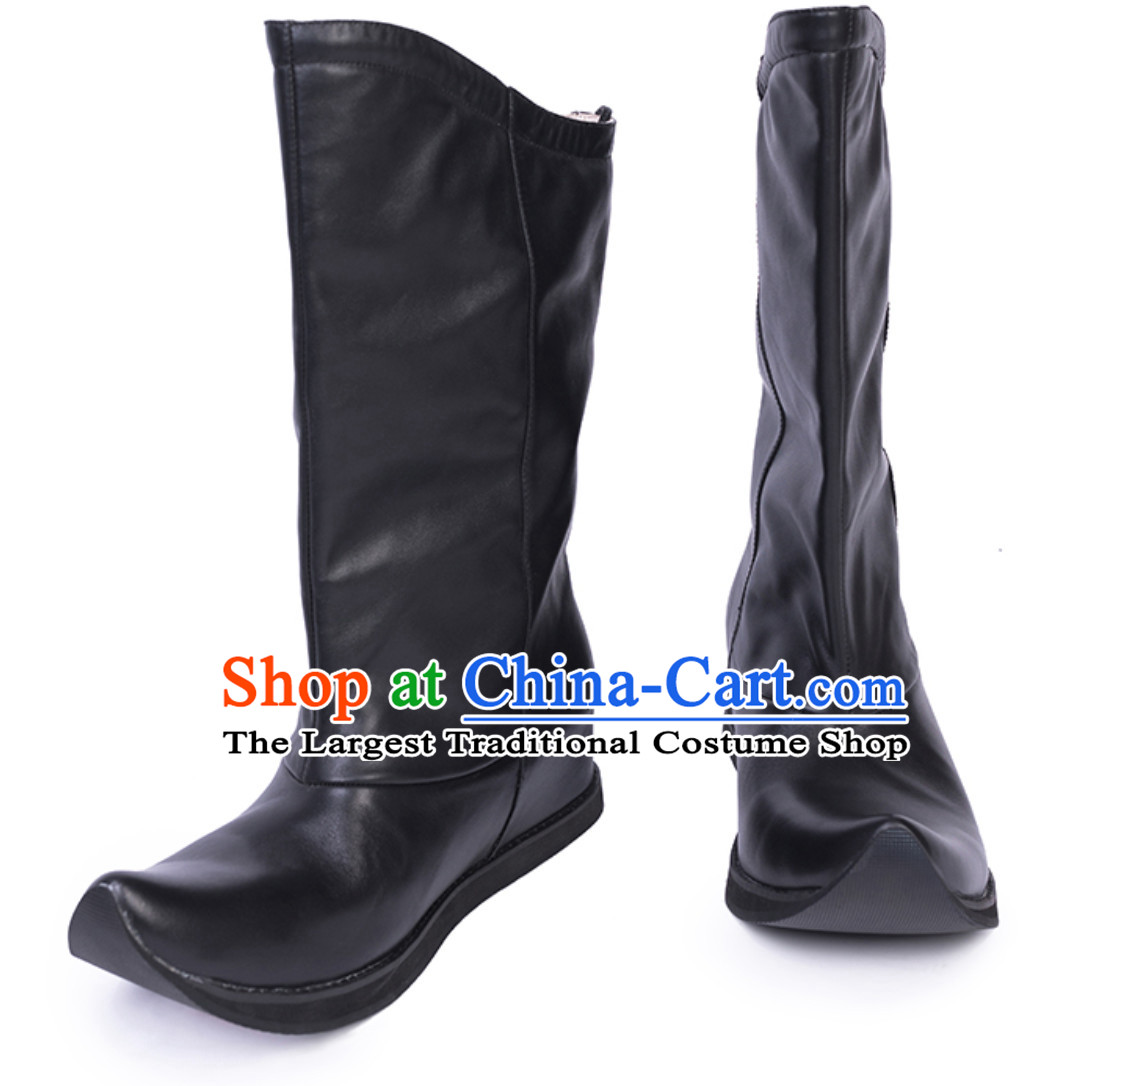 Ancient Chinese Style Long Black Leather Boots